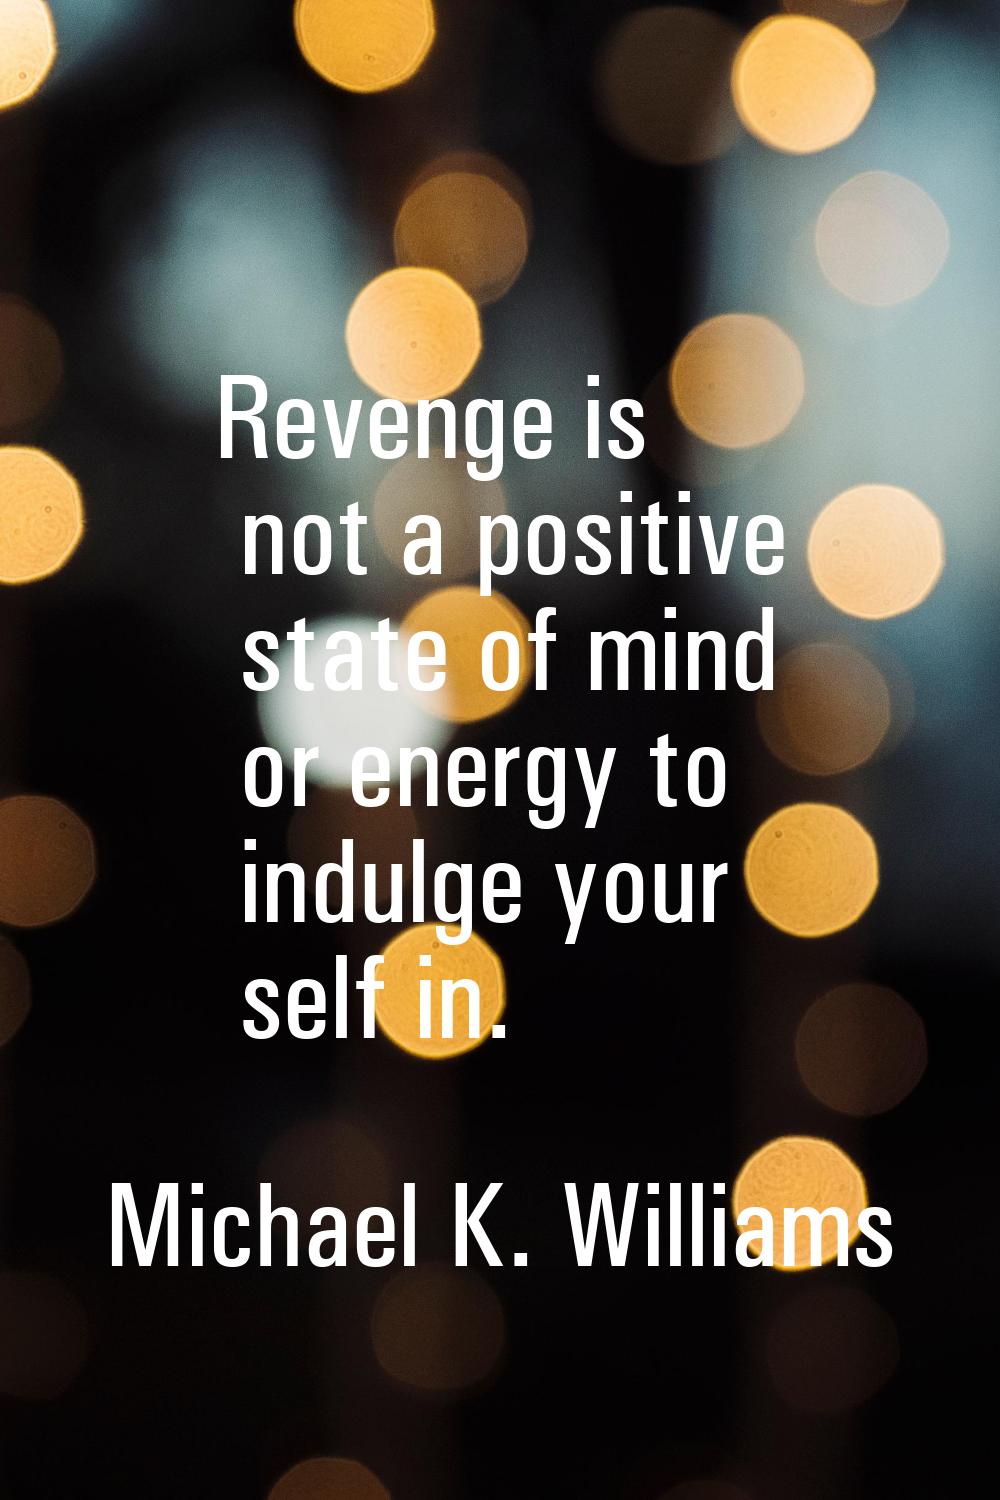 Revenge is not a positive state of mind or energy to indulge your self in.